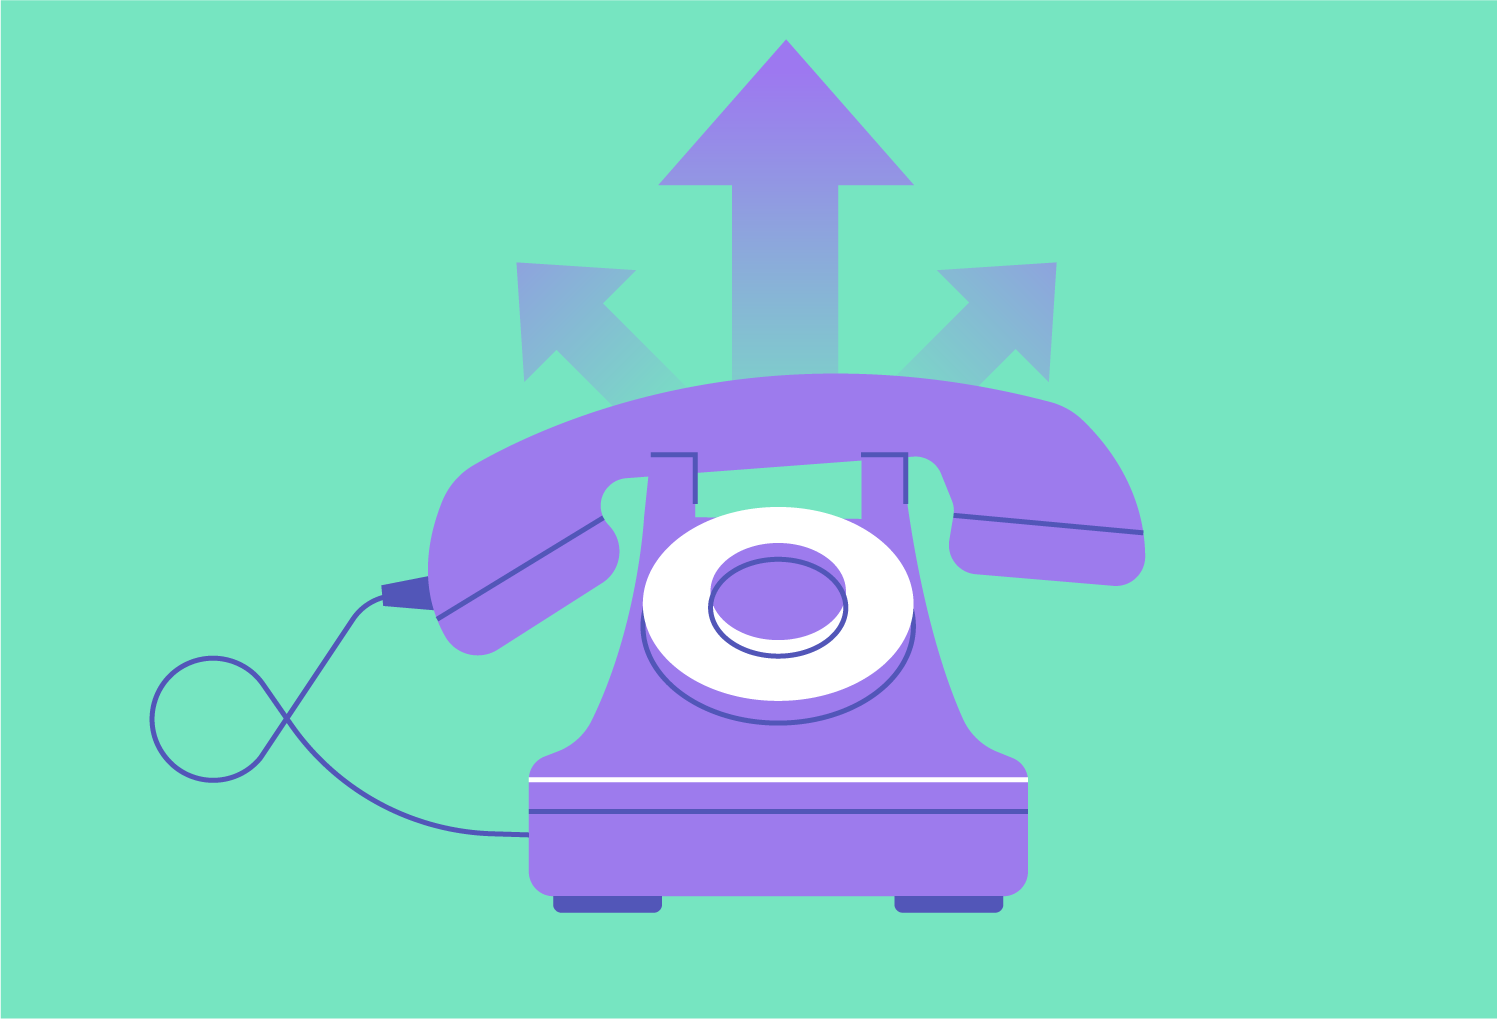 Call Center Automation: What Calls Should You Automate?